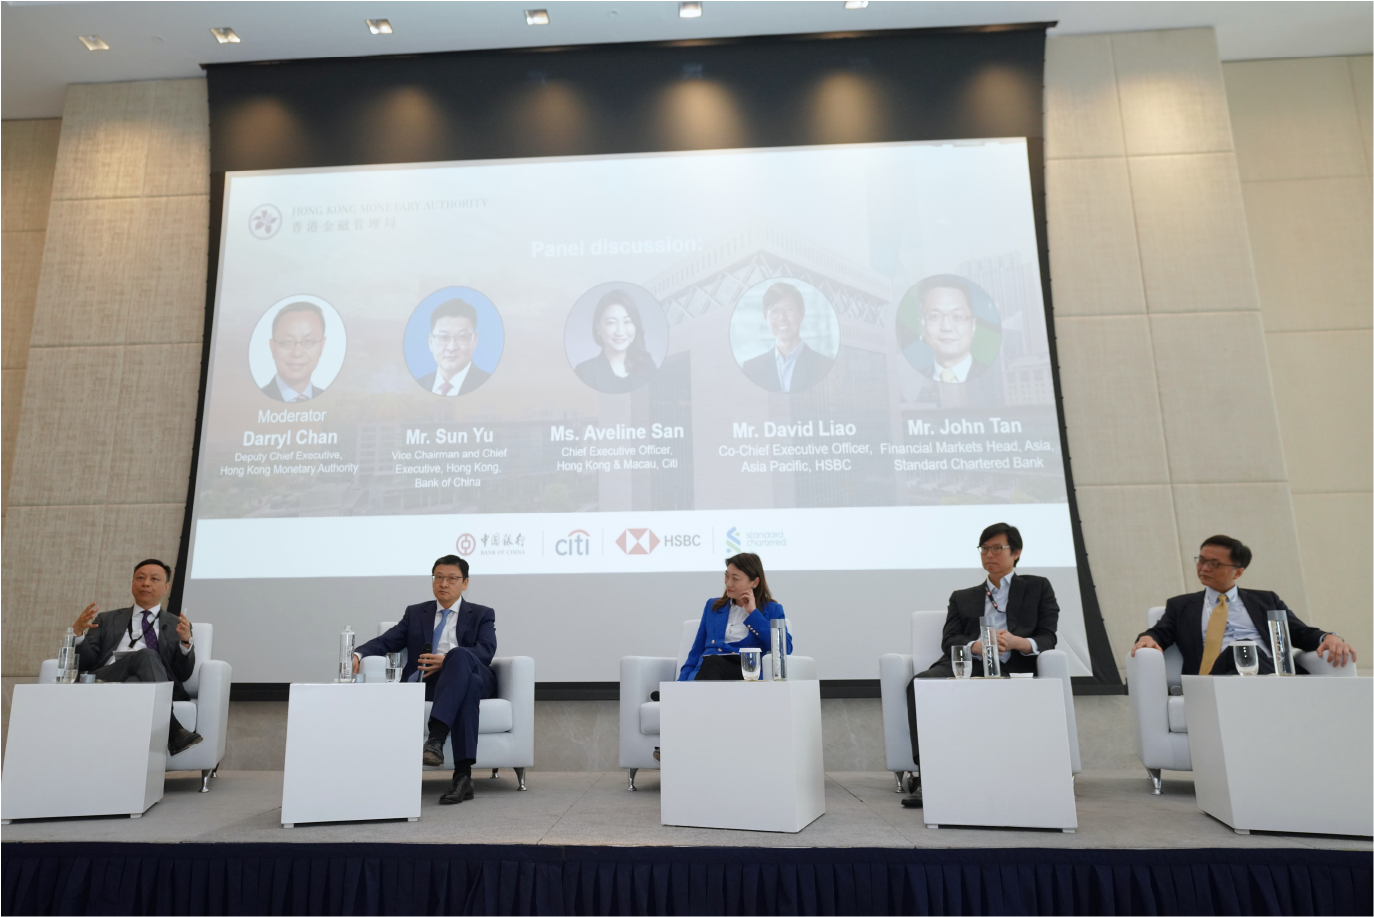 Mr Darryl Chan (first left), Deputy Chief Executive of the Hong Kong Monetary Authority, moderates a panel discussion at a luncheon in Dubai, the United Arab Emirates on 31 May (Dubai time) to demonstrate Hong Kong’s value propositions as a leading international financial centre.  Other panel speakers include (from left to right) Mr Sun Yu, Chairman, The Hong Kong Association of Banks, Vice Chairman and Chief Executive of Bank of China (Hong Kong); Ms Avelin San, Chief Executive Officer, Hong Kong and Macau, Citi; Mr David Liao, Co-Chief Executive, Asia-Pacific, The Hongkong and Shanghai Banking Corporation; and Mr John Tan, Financial Markets Head, Asia, Standard Chartered Bank.